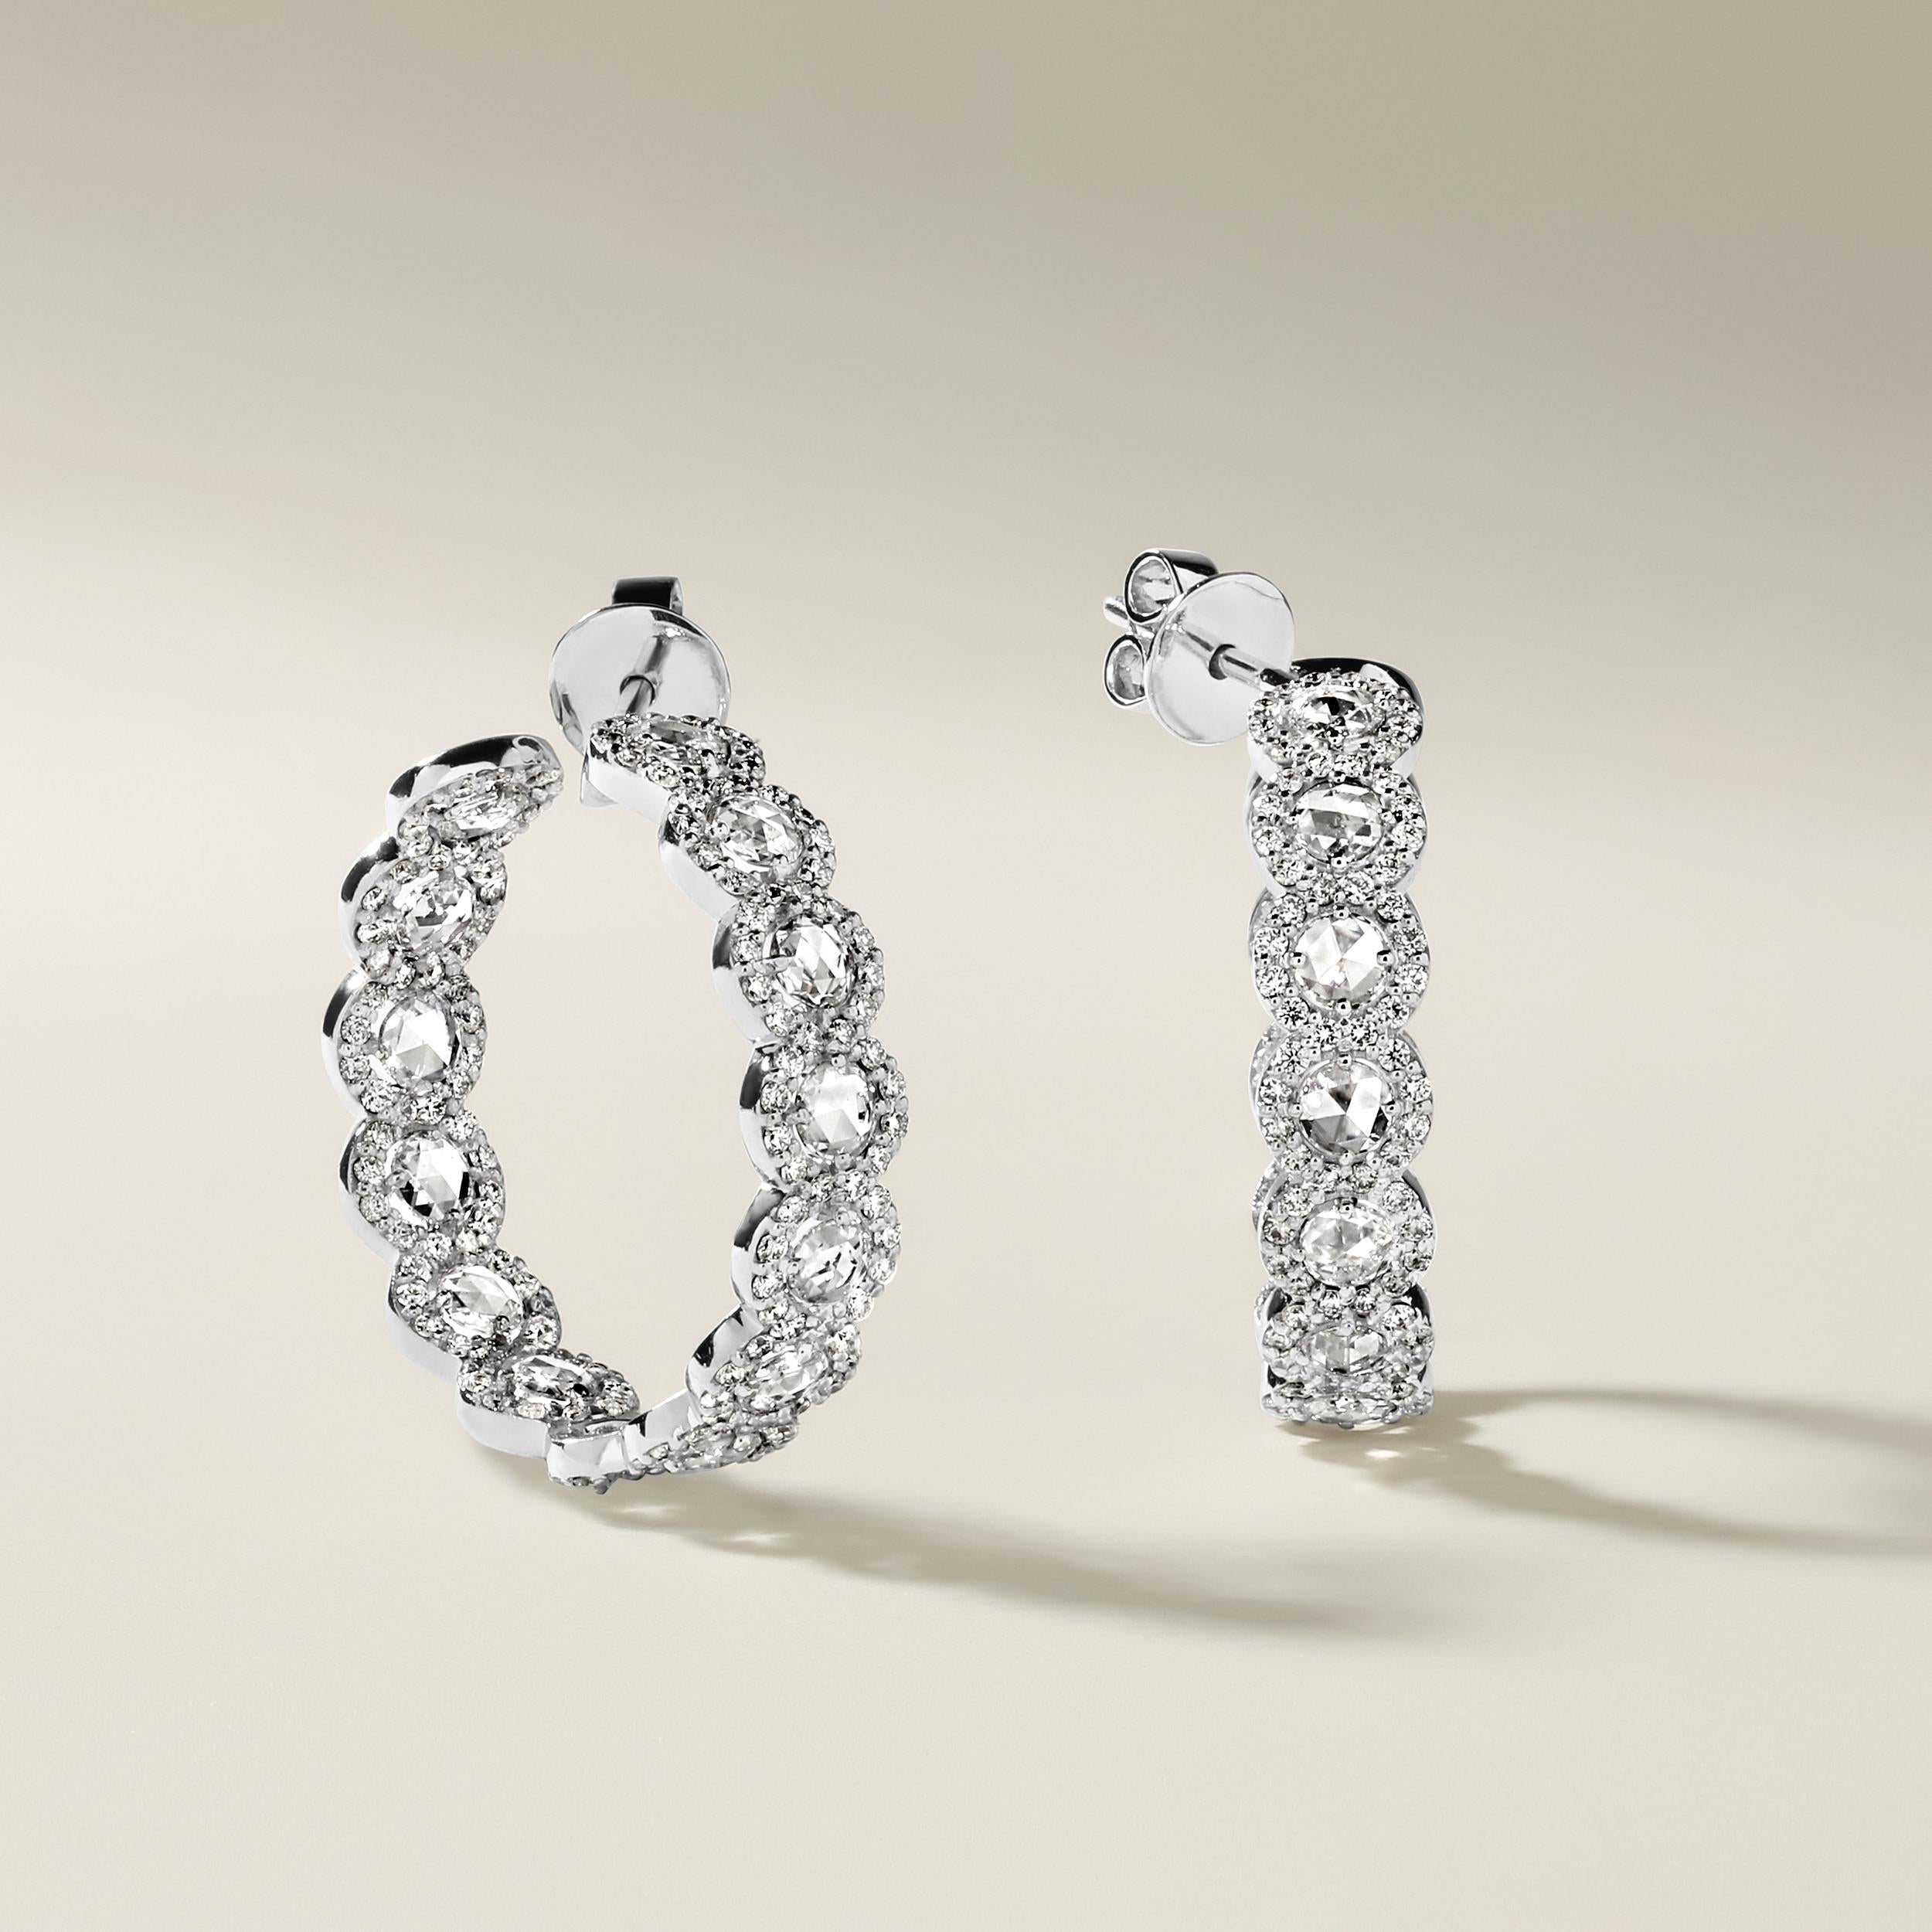 Crafted in 12.13 grams of 18K White Gold, the earrings contain 28 stones of Rose Cut Natural Diamonds with a total of 2.22 carat in E-F color and VVS-VS clarity combined with 290 stones of Round Natural Diamonds with a total of 1.71 carat in E-F